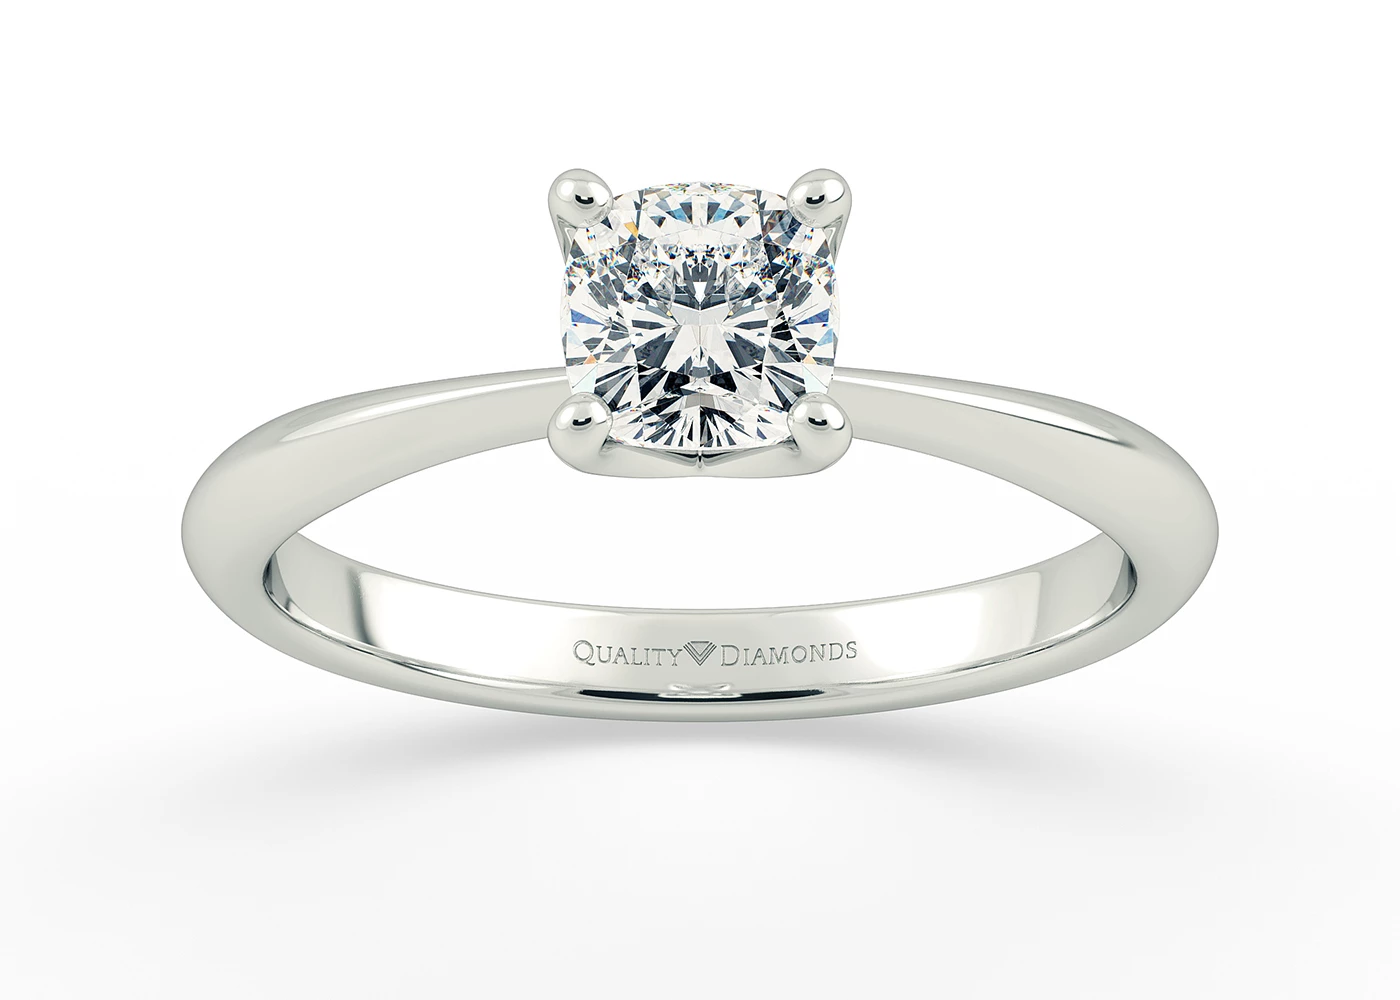 Two Carat Cushion Solitaire Diamond Engagement Ring in 9K White Gold